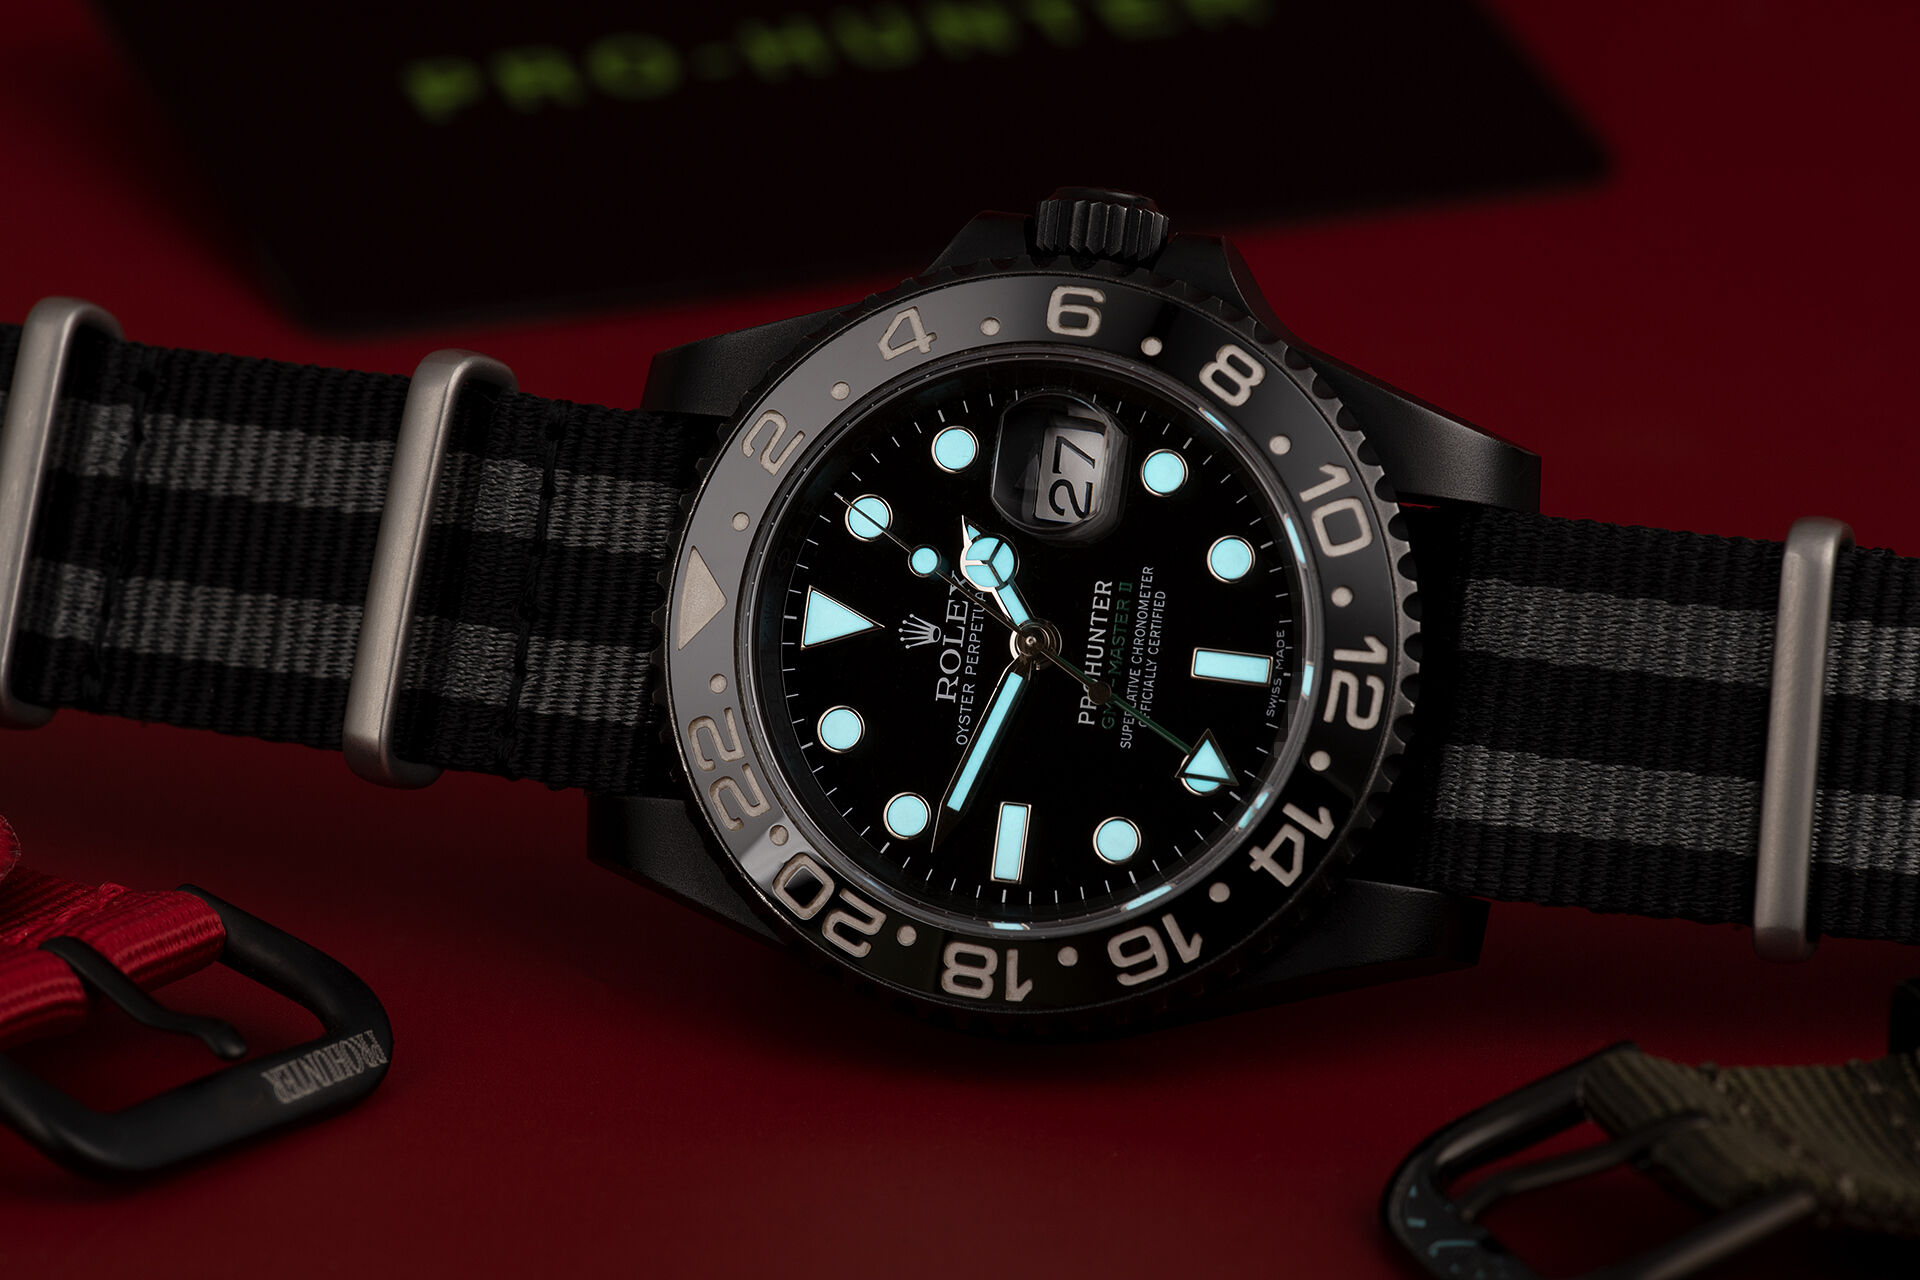 ref 116710LN | Limited Edition 'One of 100' | Pro Hunter GMT-Master II